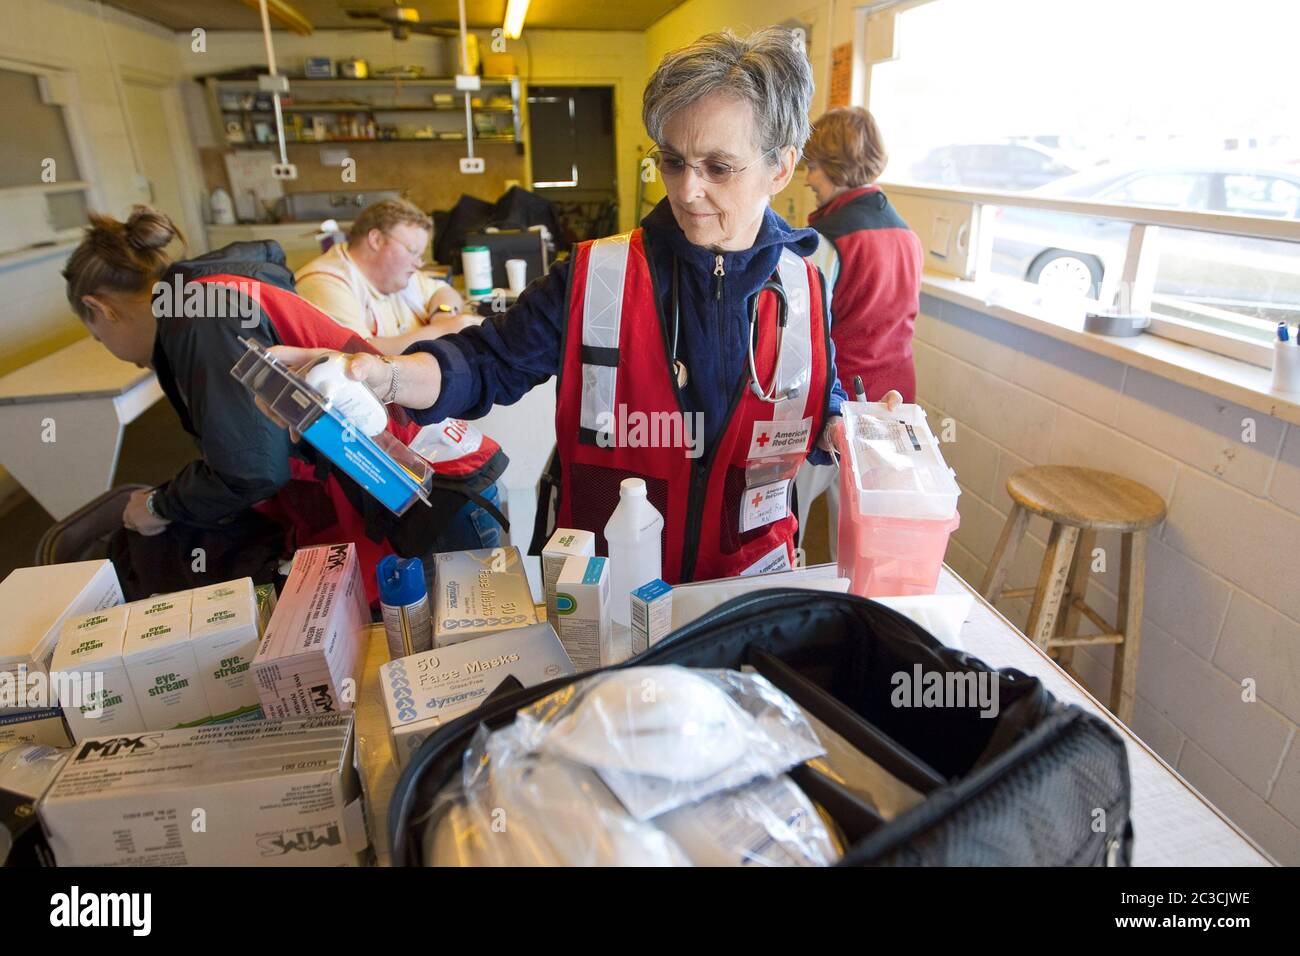 April 19, 2013 West, Texas USA: Volunteers with the Red Cross arrive to provide food, water, emotional support, and health services to residents of the small Central Texas town after a fertilizer plant explosion two days earlier killed 15 people and destroyed and damaged hundreds of homes and businesses. ©Marjorie Kamys Cotera/Daemmrich Photography Stock Photo